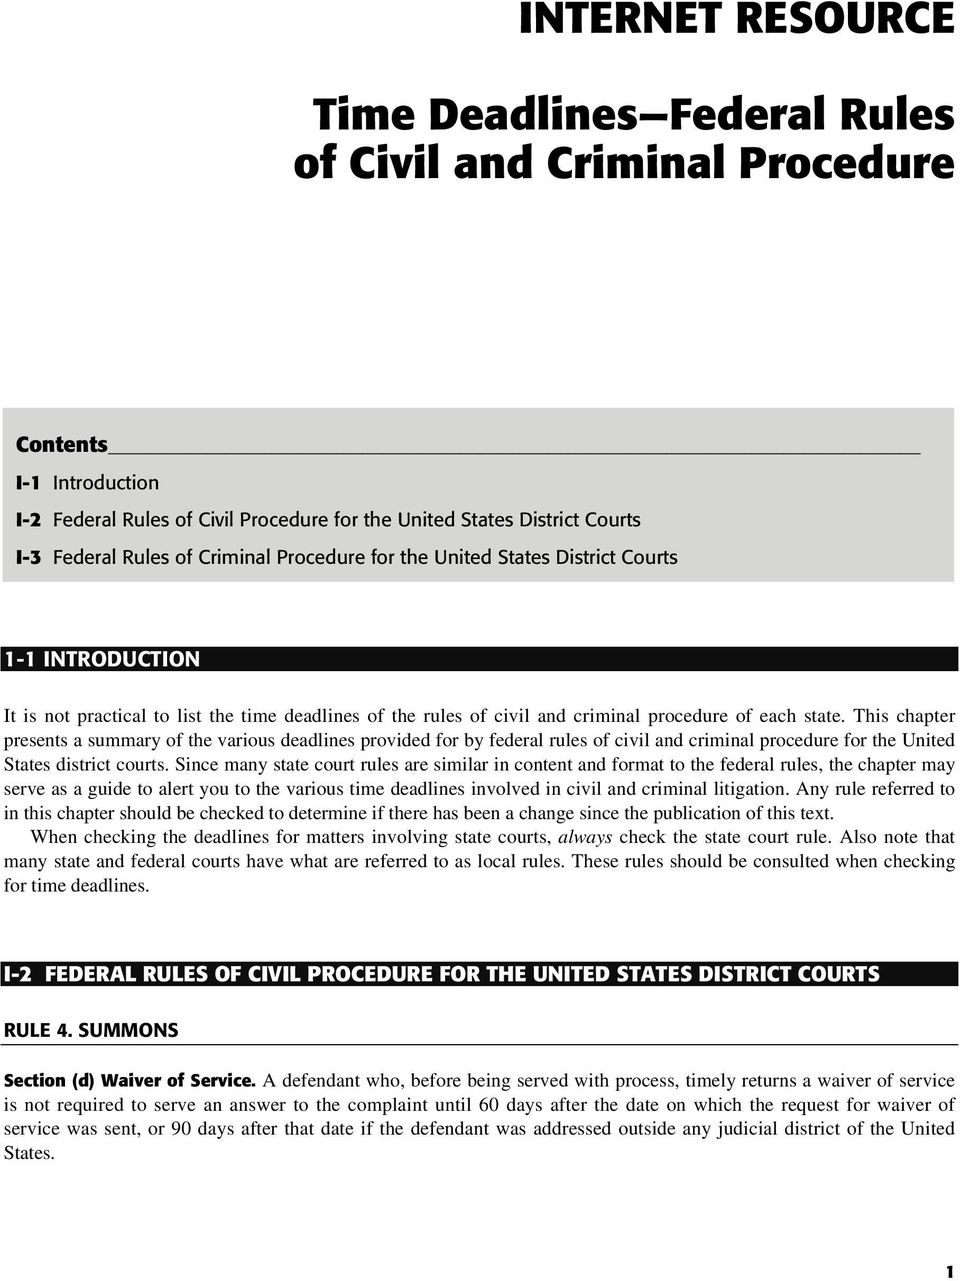 This chapter presents a summary of the various deadlines provided for by federal rules of civil and criminal procedure for the United States district courts.